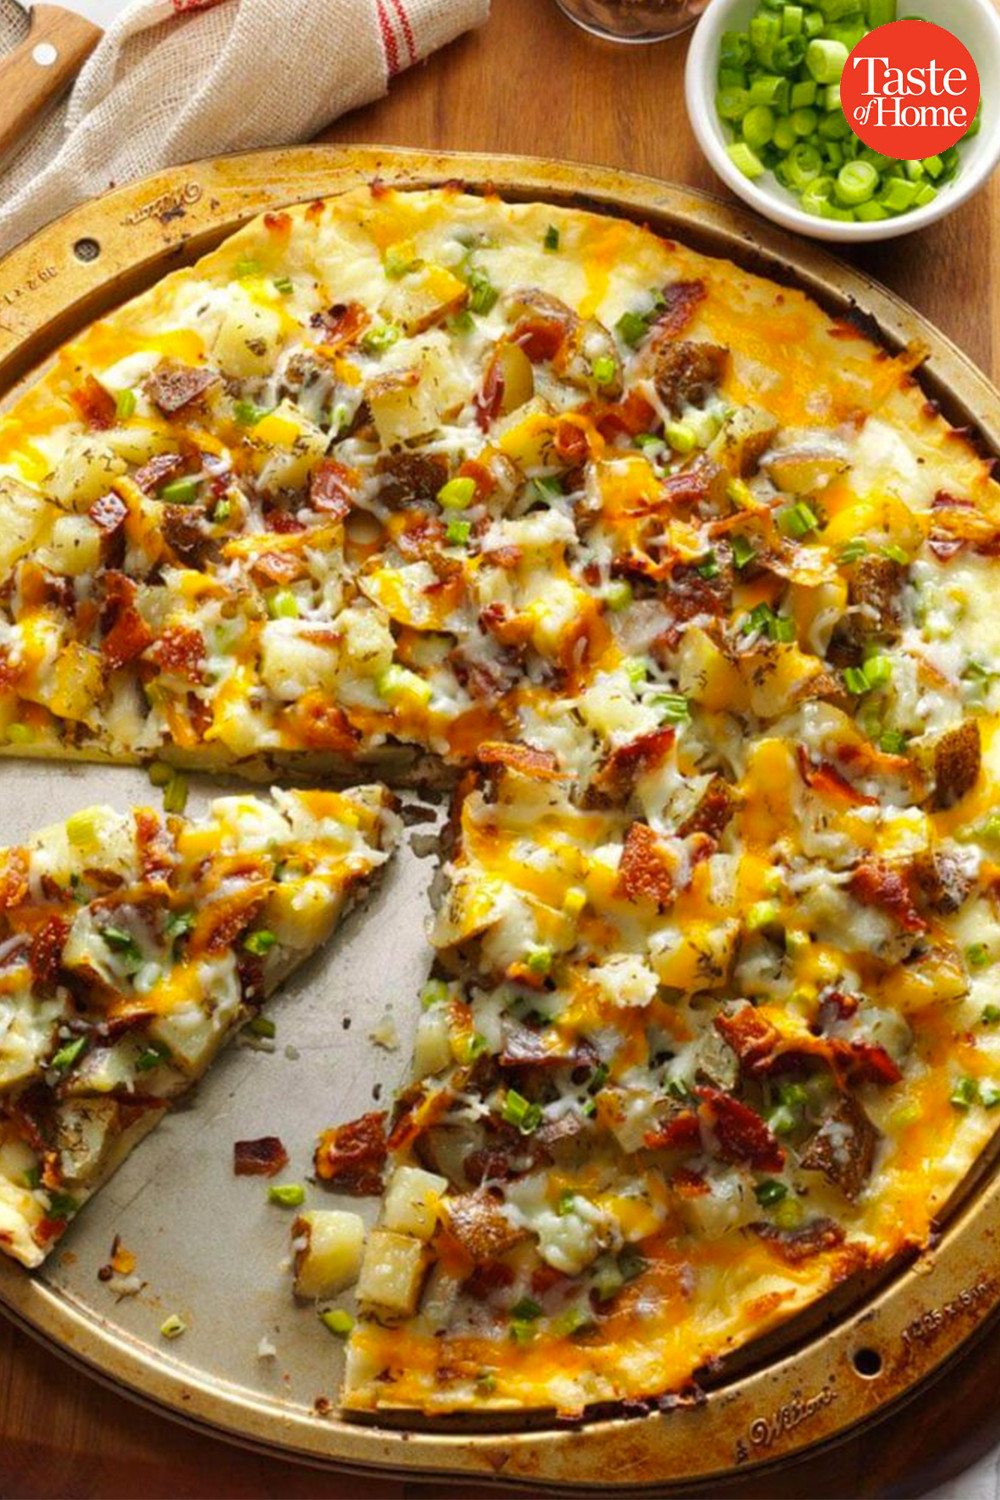 Super Bowl Main Dishes
 100 Super Bowl Party Recipes You Haven’t Tried Yet